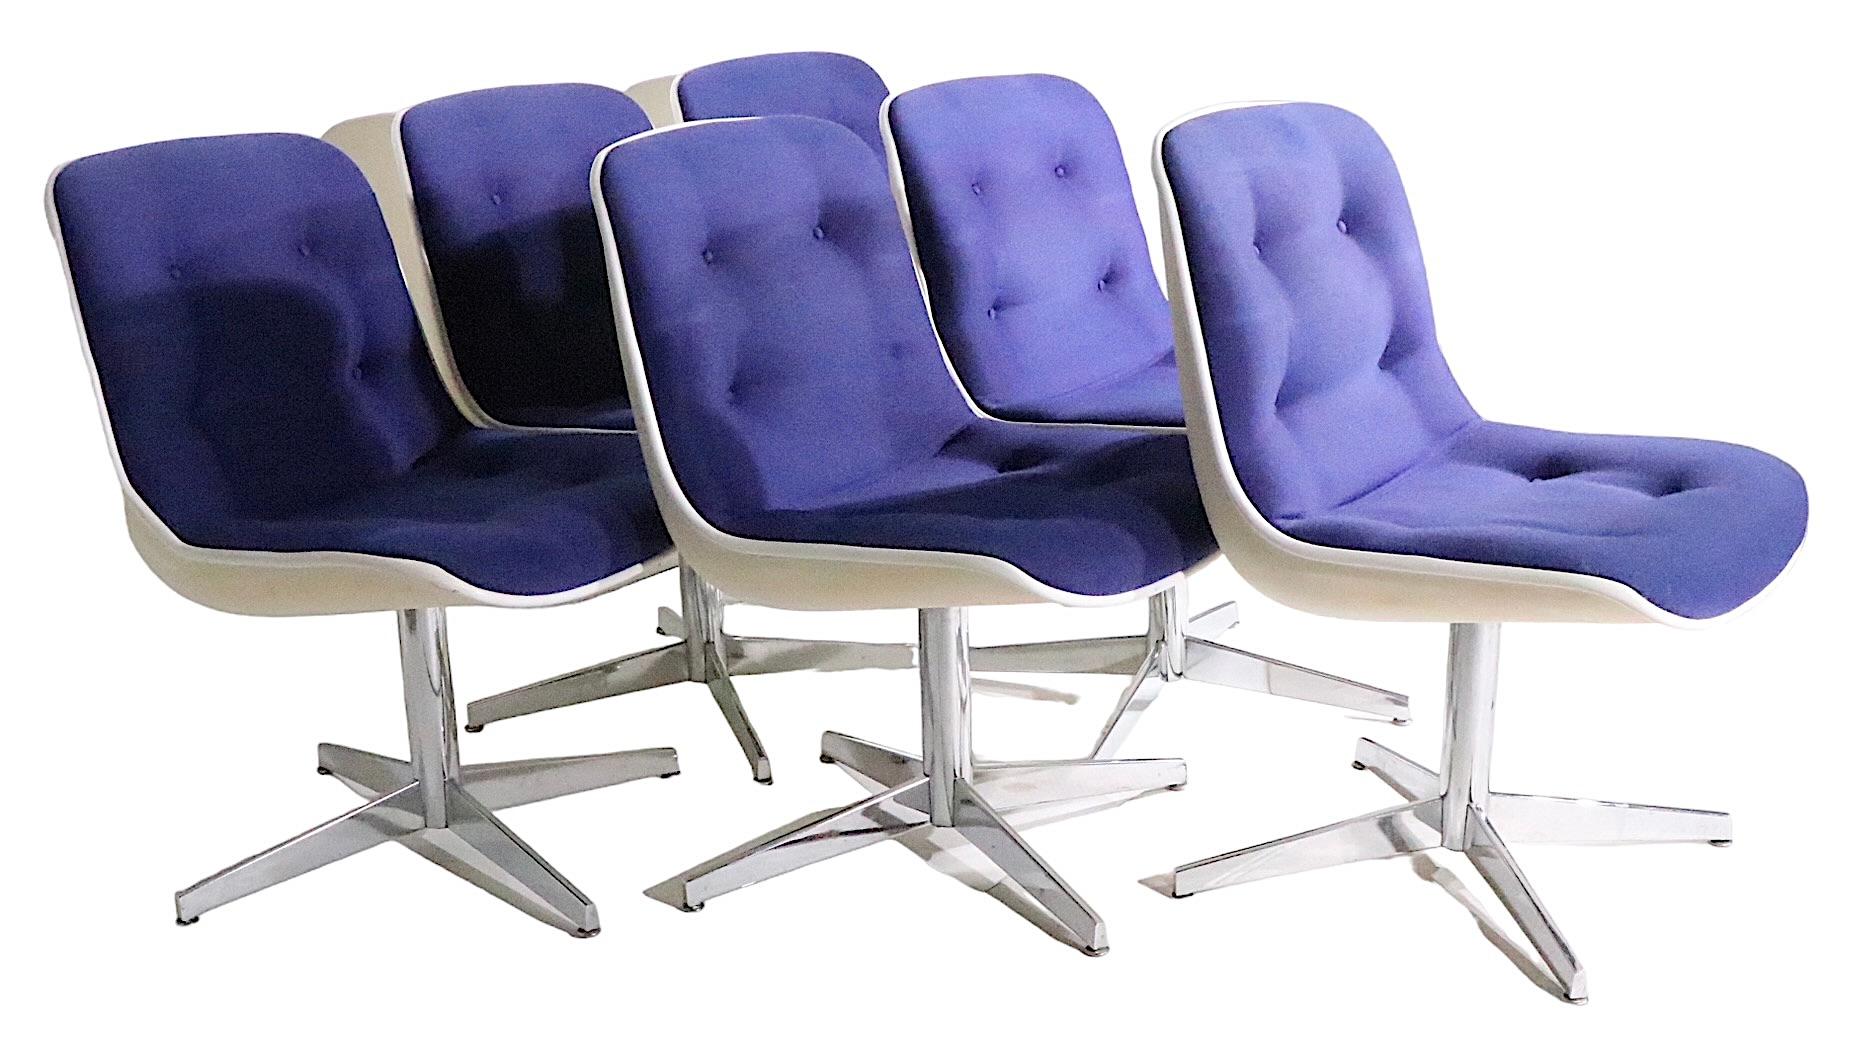 Steelcase Swivel  Chairs in the style of Pollack c.1970's 6 available For Sale 8